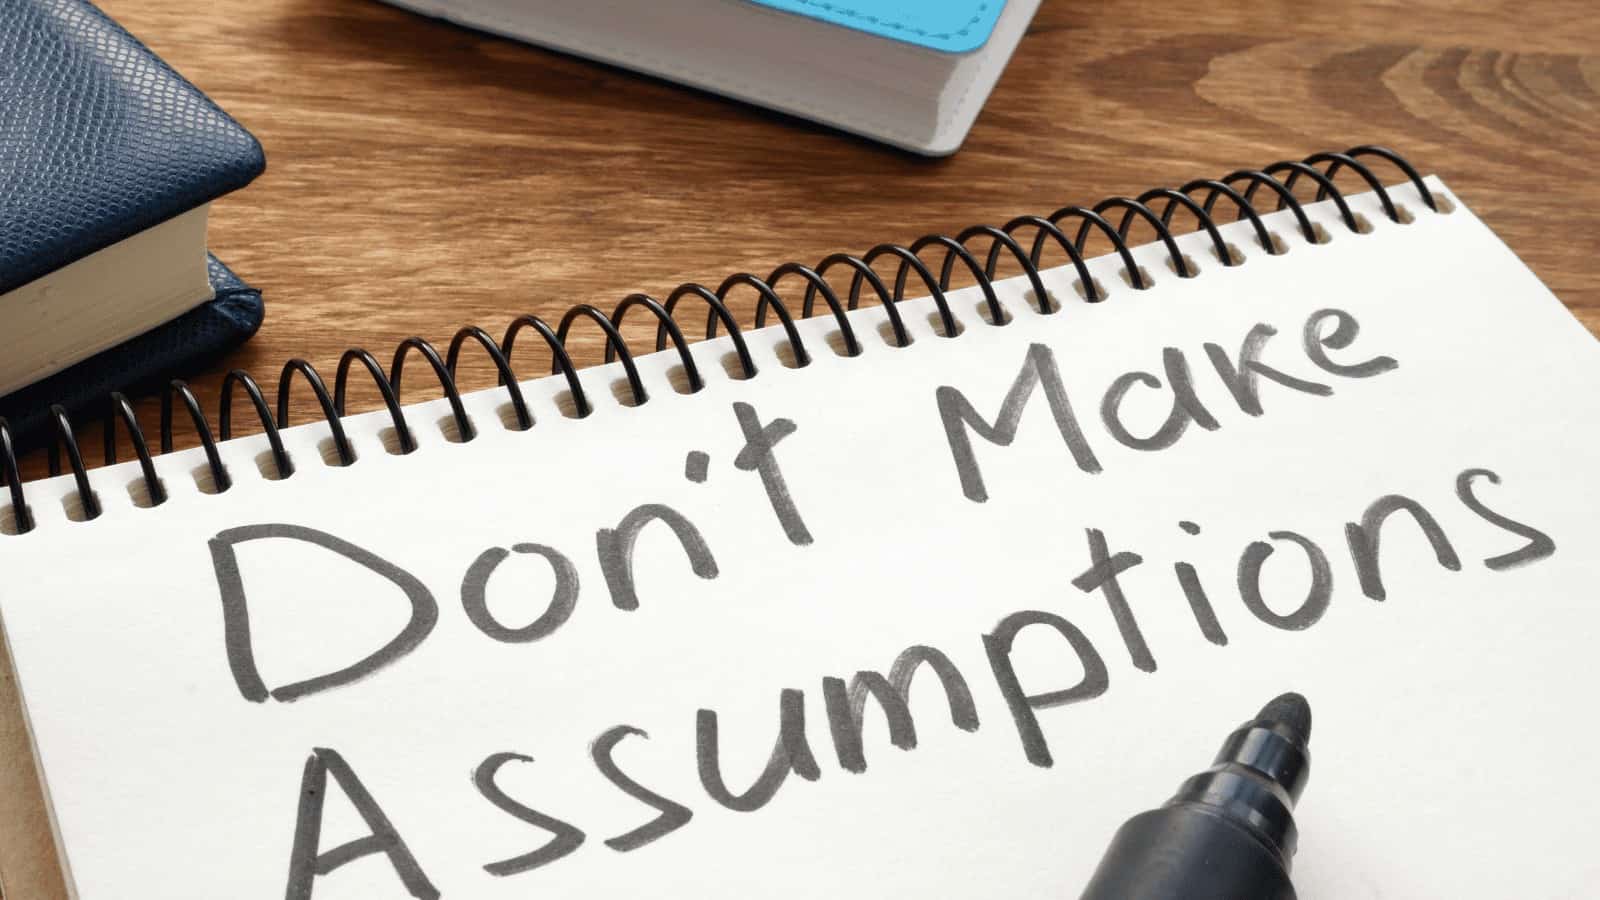 5 Ways Making Assumptions Can Harm Self-Esteem + How to Prevent It